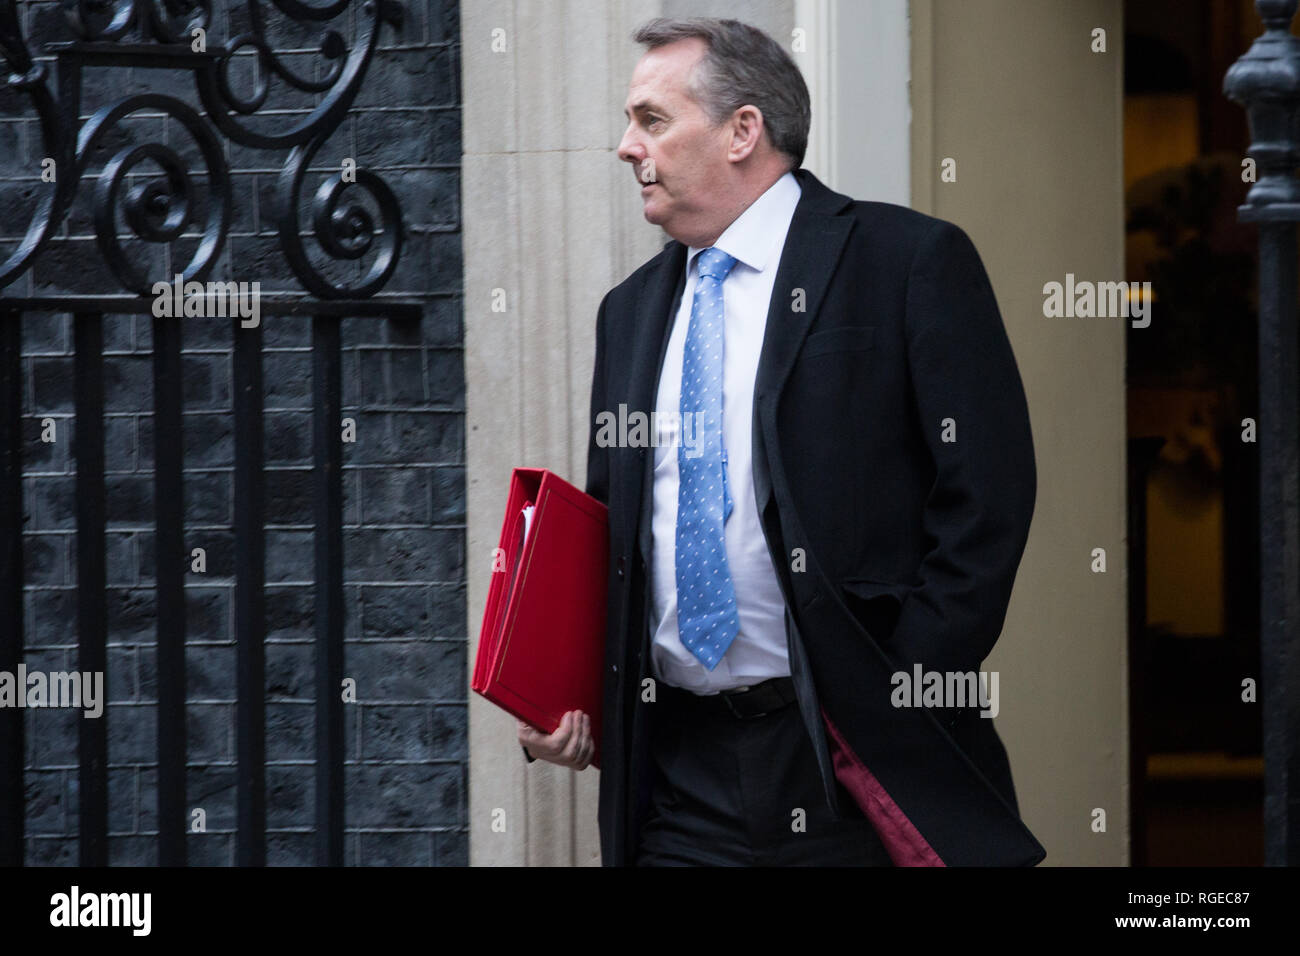 London, UK. 29th Jan, 2019. Liam Fox MP, Secretary of State for International Trade and President of the Board of Trade, leaves 10 Downing Street following a Cabinet meeting on the day of votes in the House of Commons on amendments to Prime Minister Theresa May's final Brexit withdrawal agreement which could determine the content of the next stage of negotiations with the European Union. Credit: Mark Kerrison/Alamy Live News Stock Photo